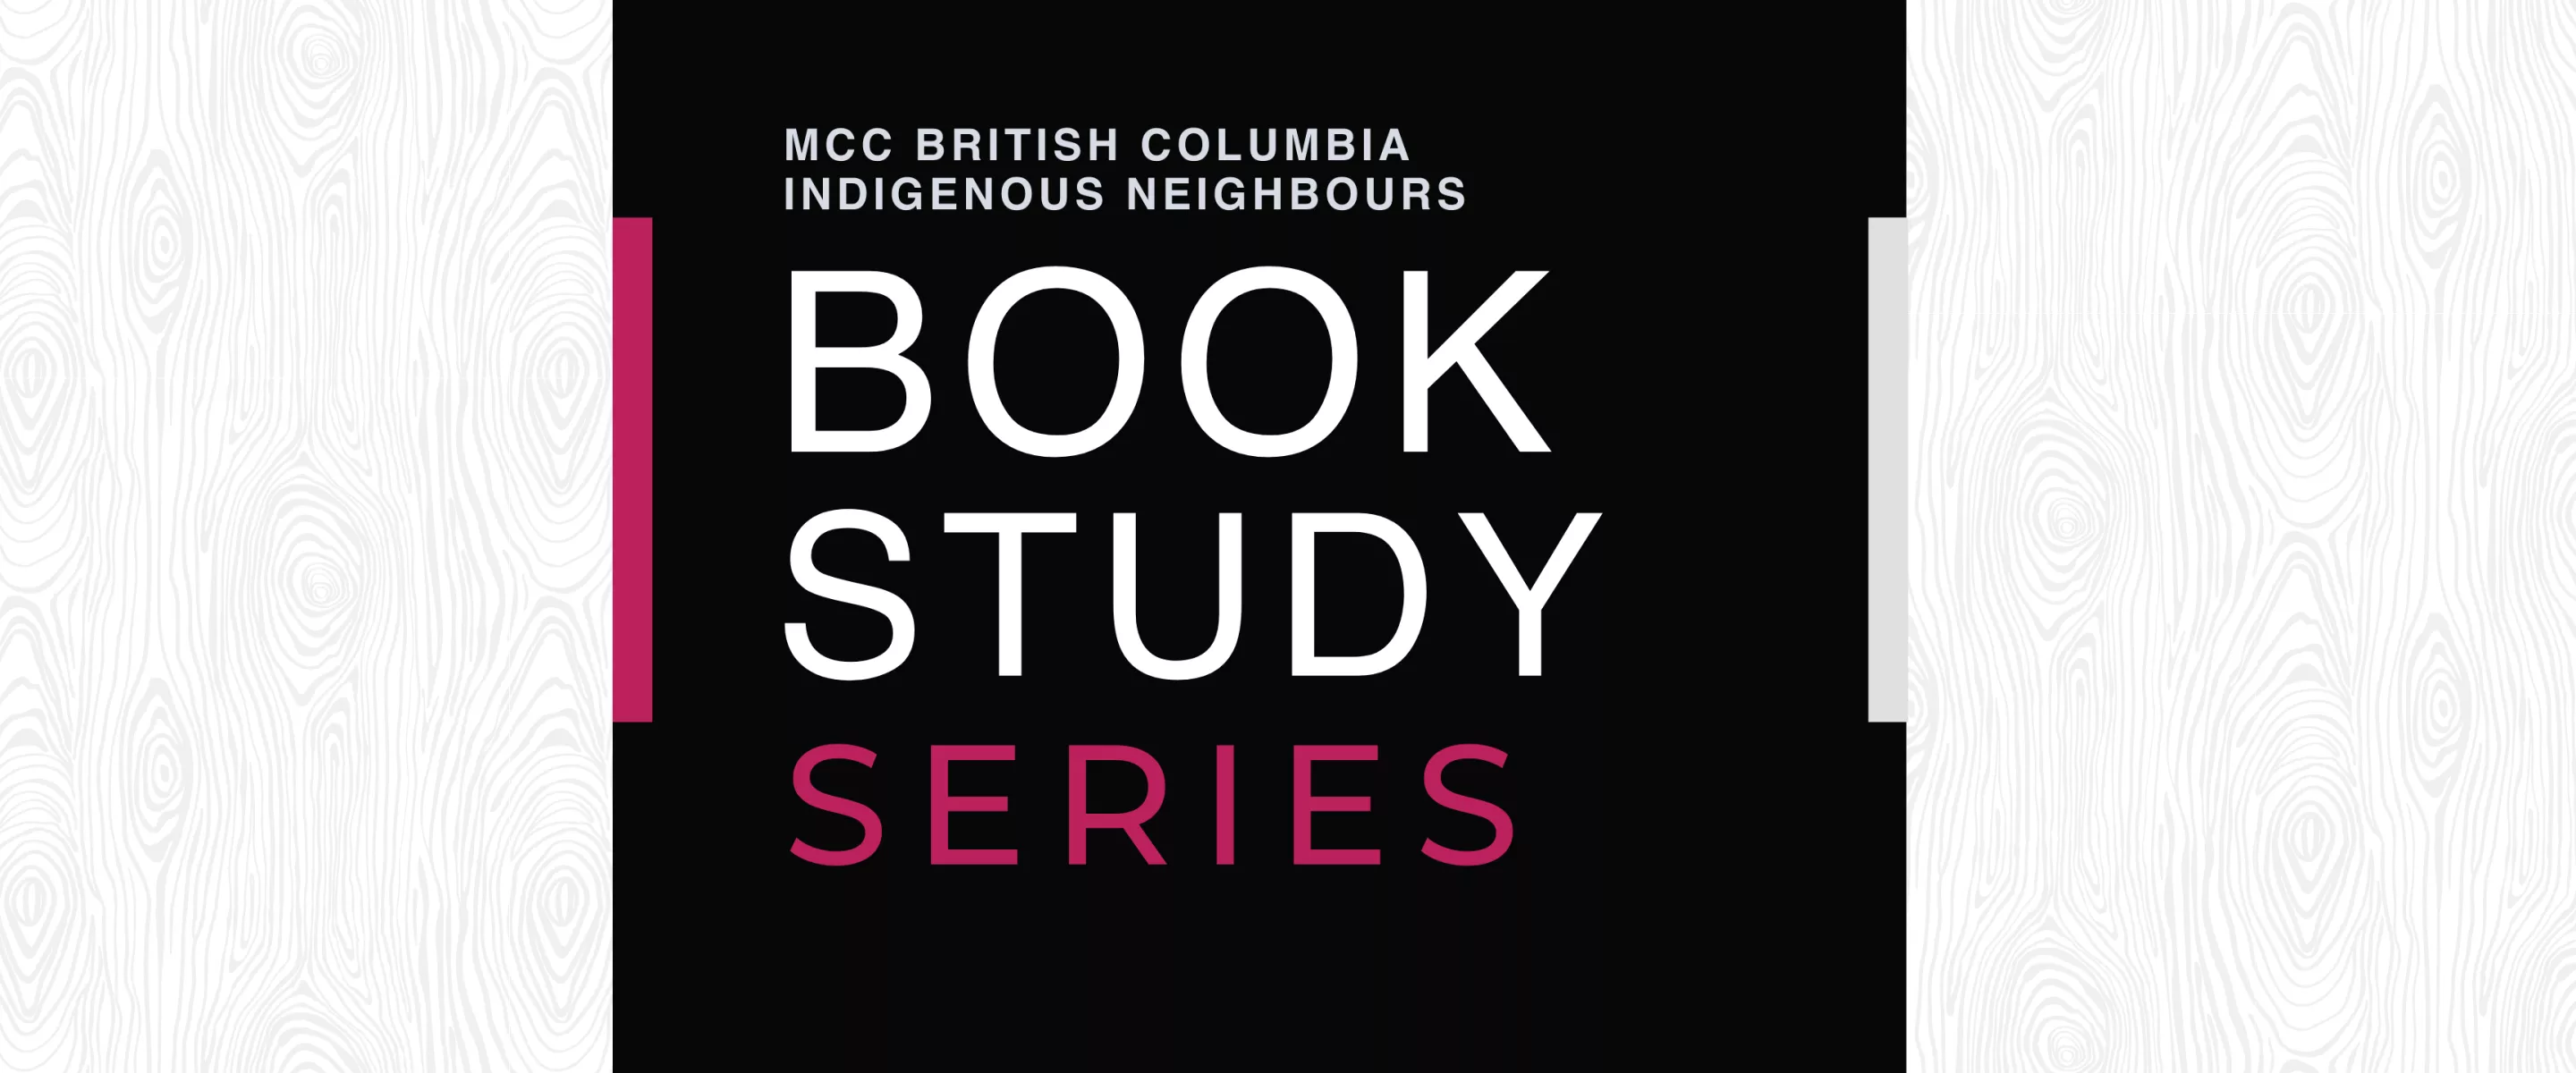 Banner reads "MCC British Columbia Book Study Series" with a black and pink design elements with a grey wood pattern in the background.